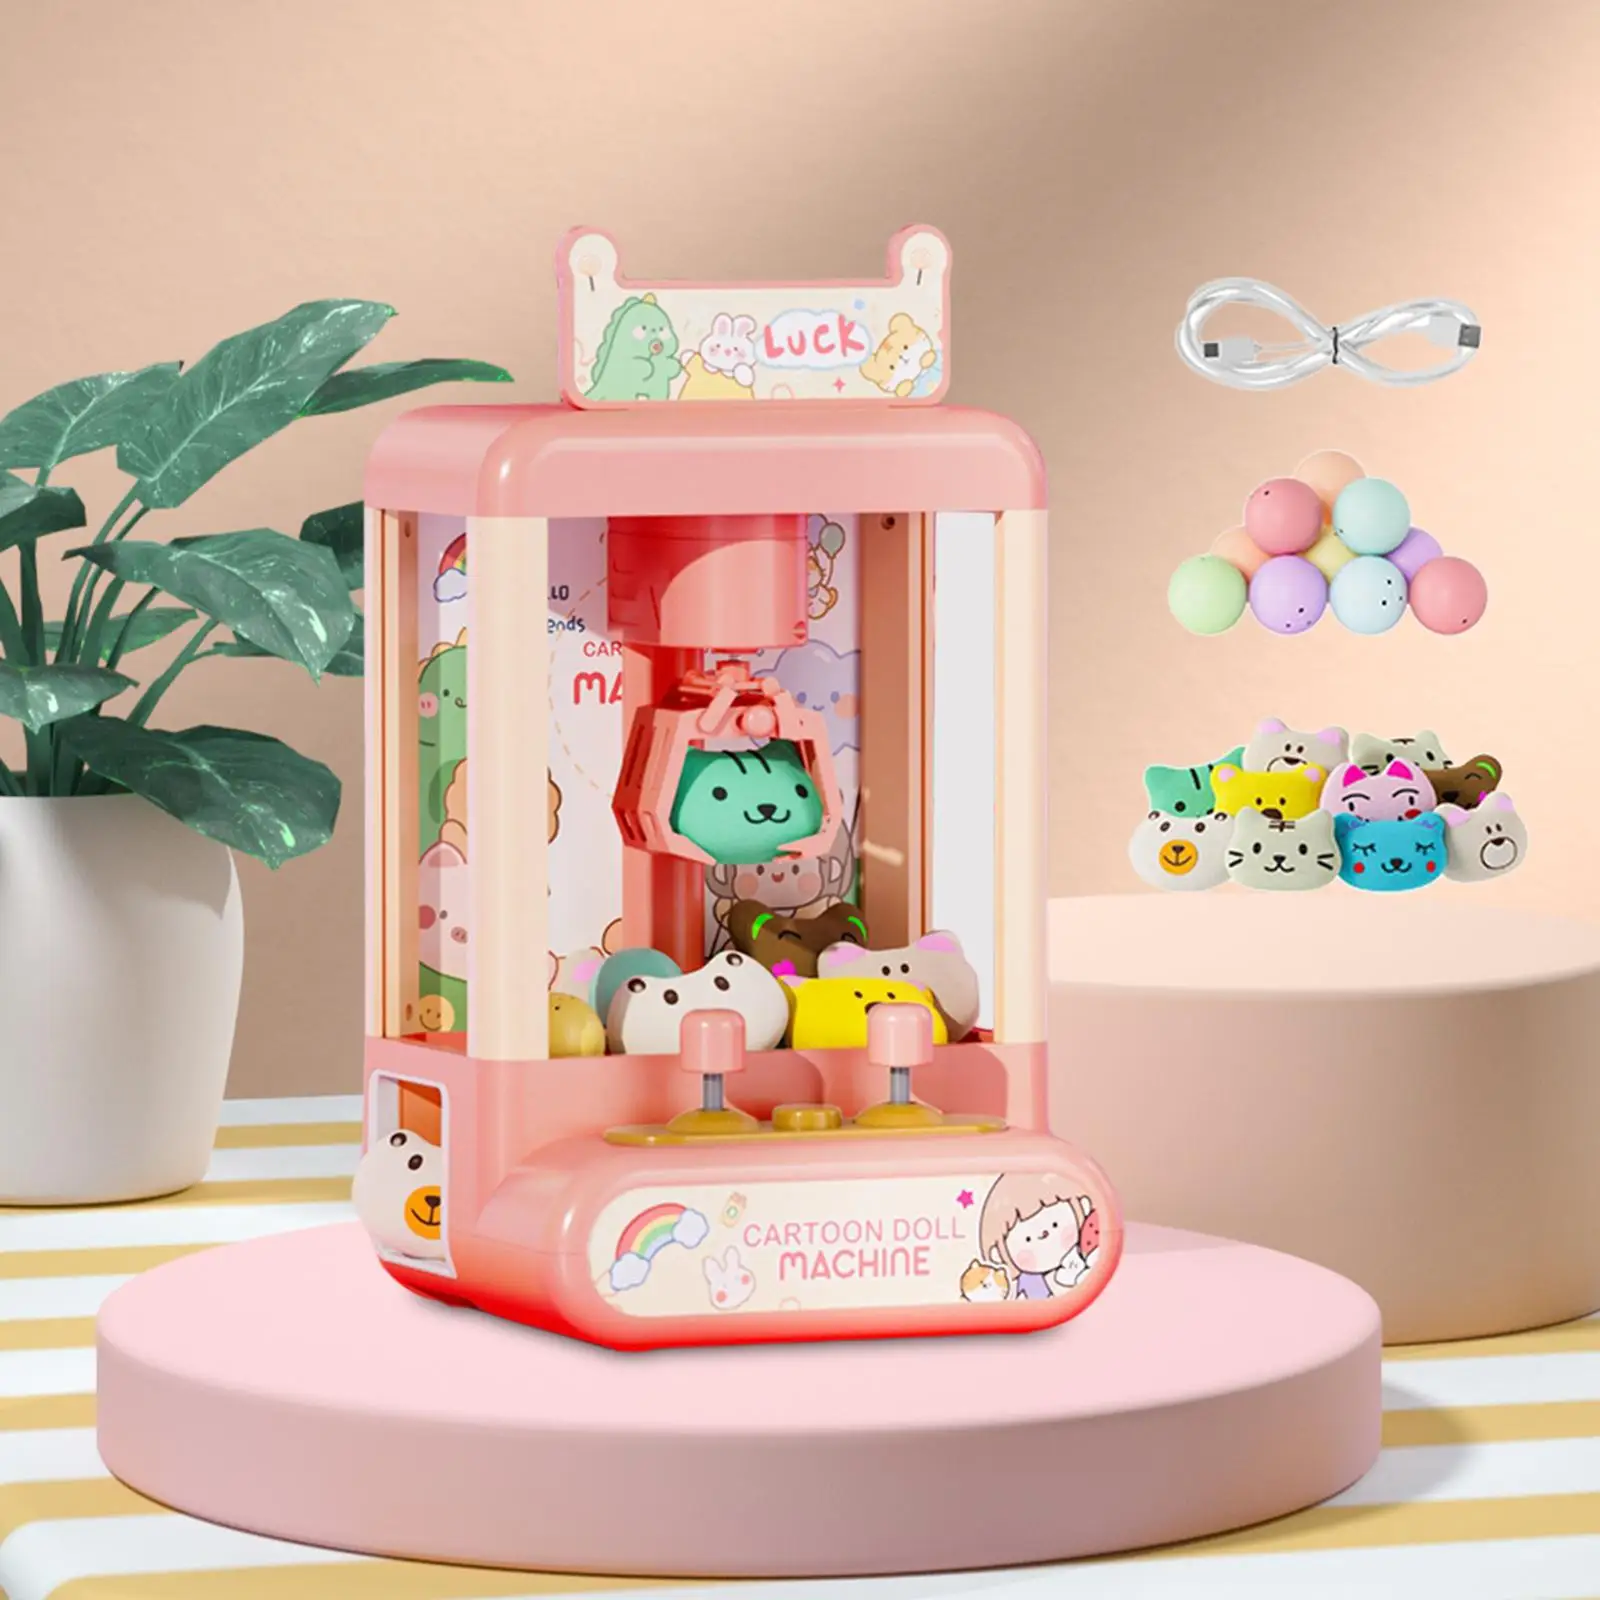 Claw Machine for Kids with 10 Plush Dolls 10 Capsules Candy Capsule Claw Game Arcade Games for Girls Boys Children Birthday Gift